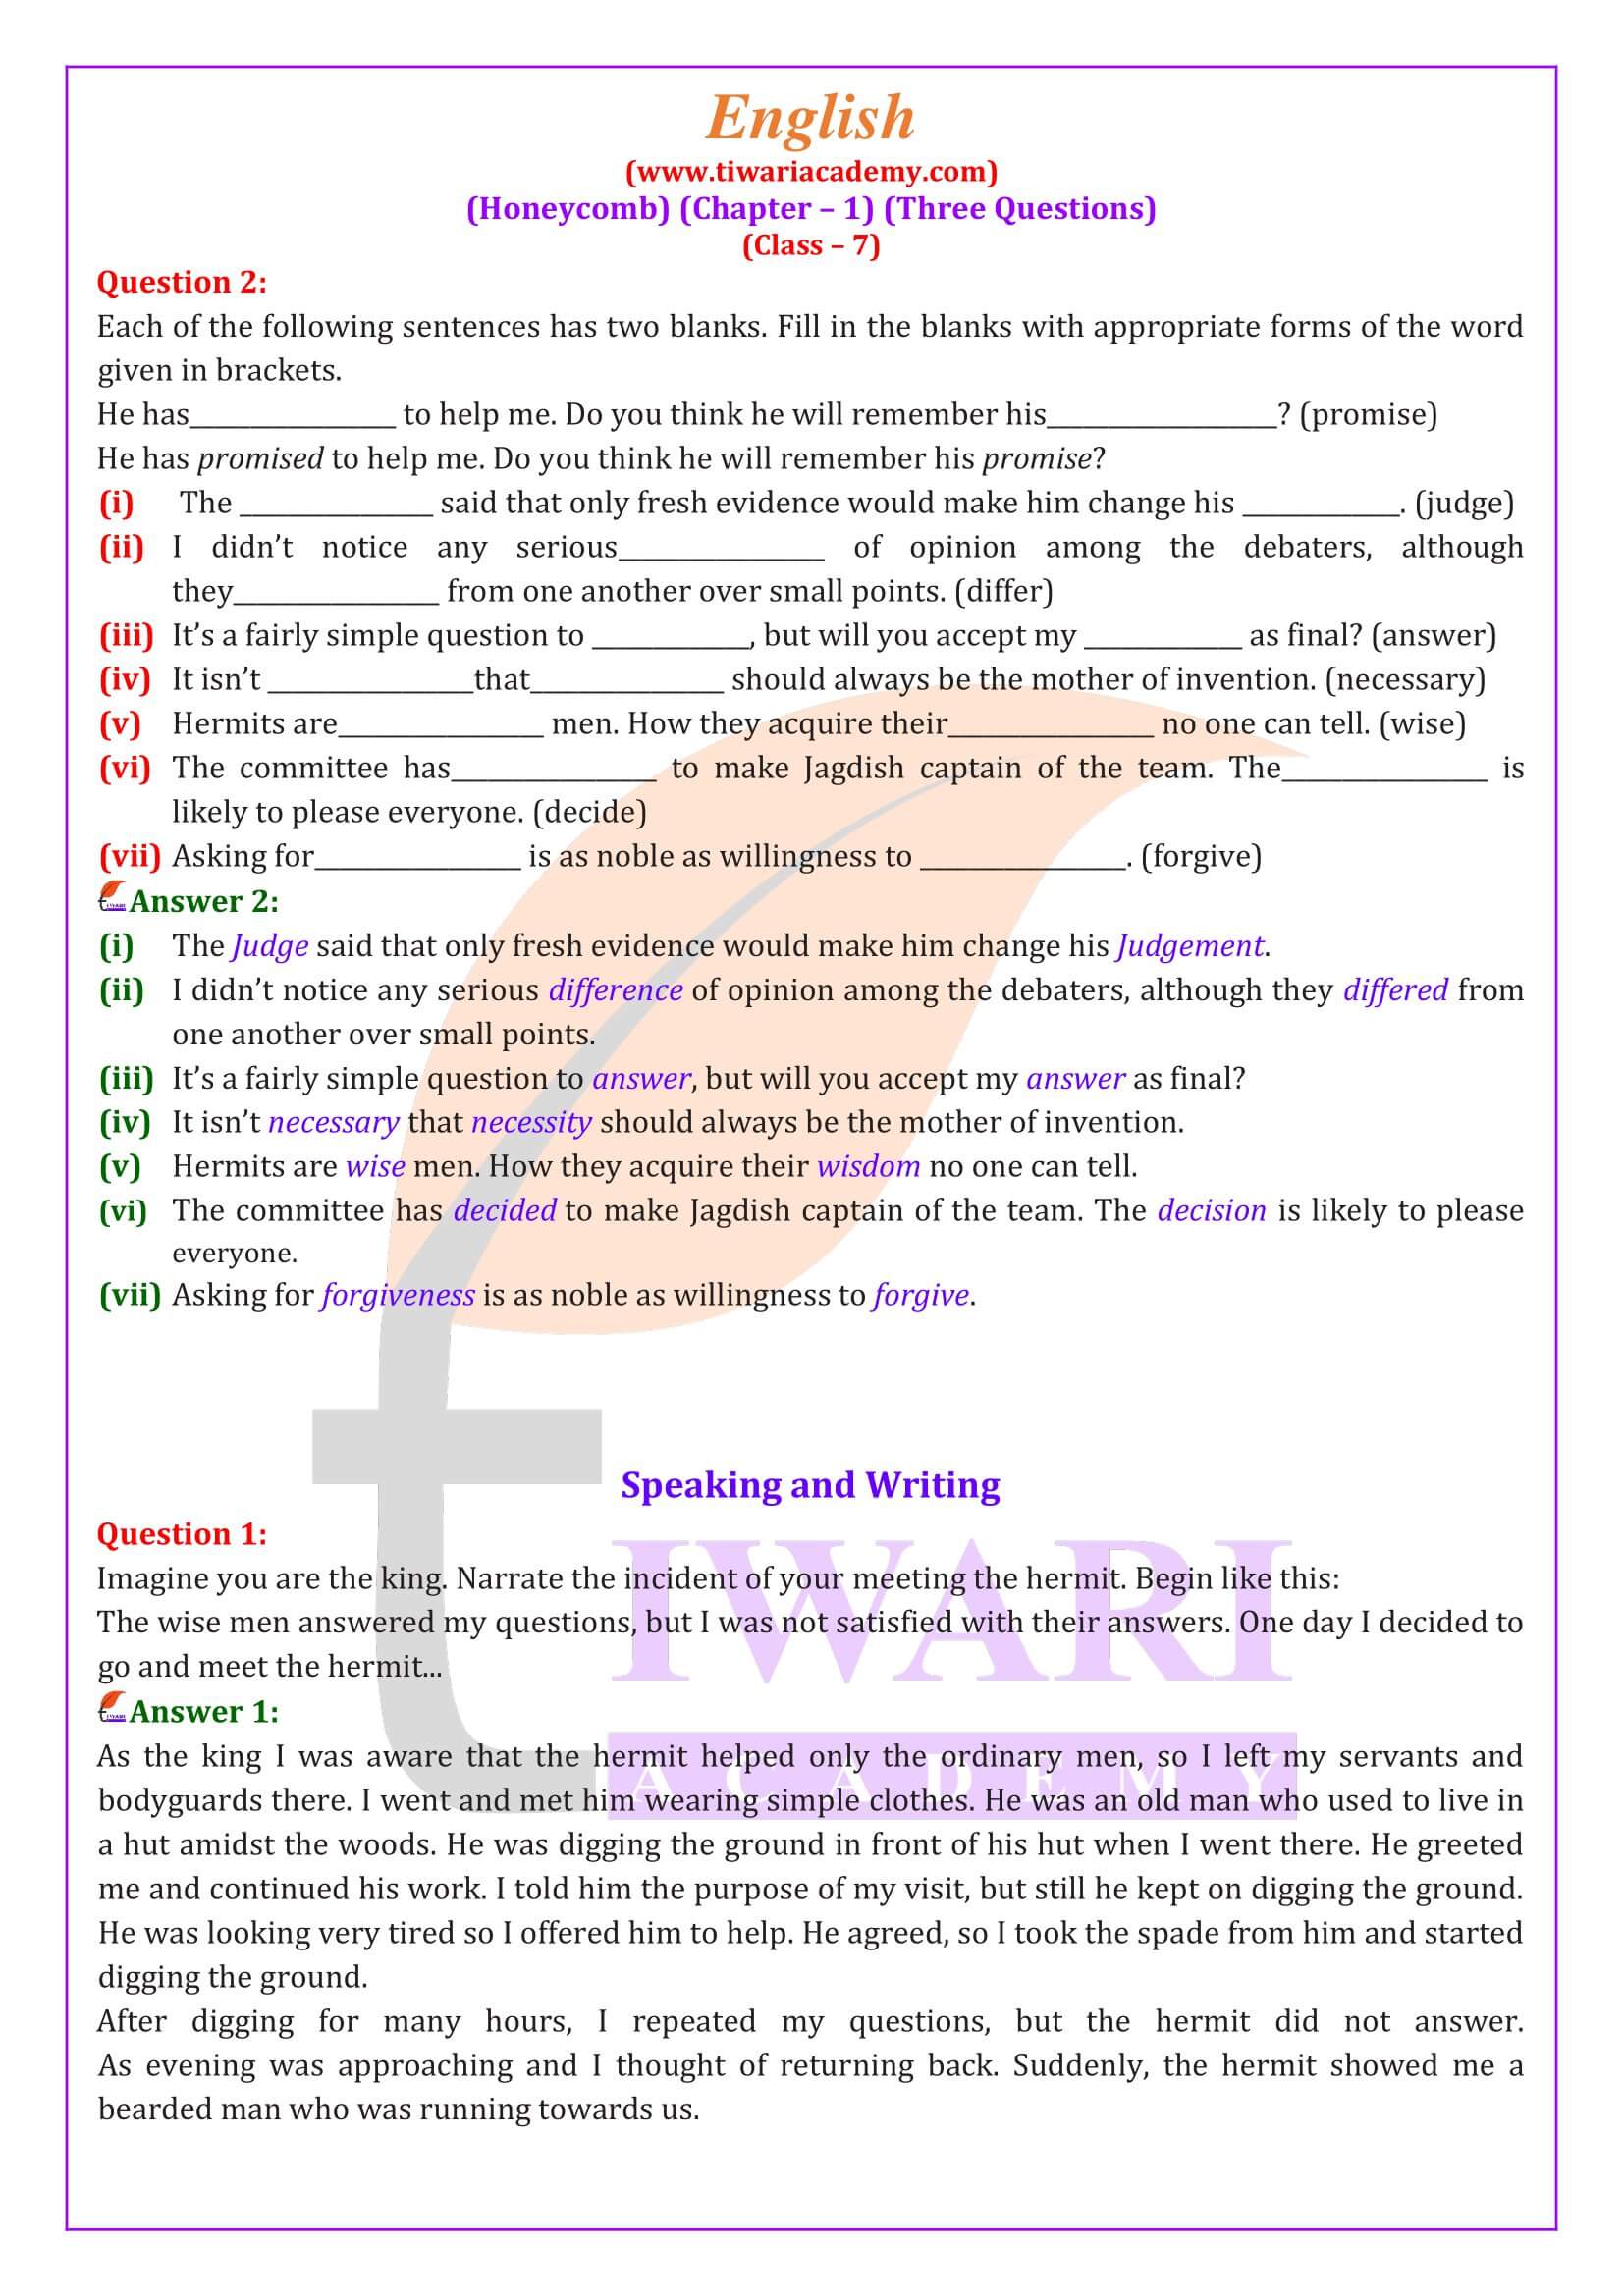 Class 7 English Honeycomb Chapter 1 Question Answers guide